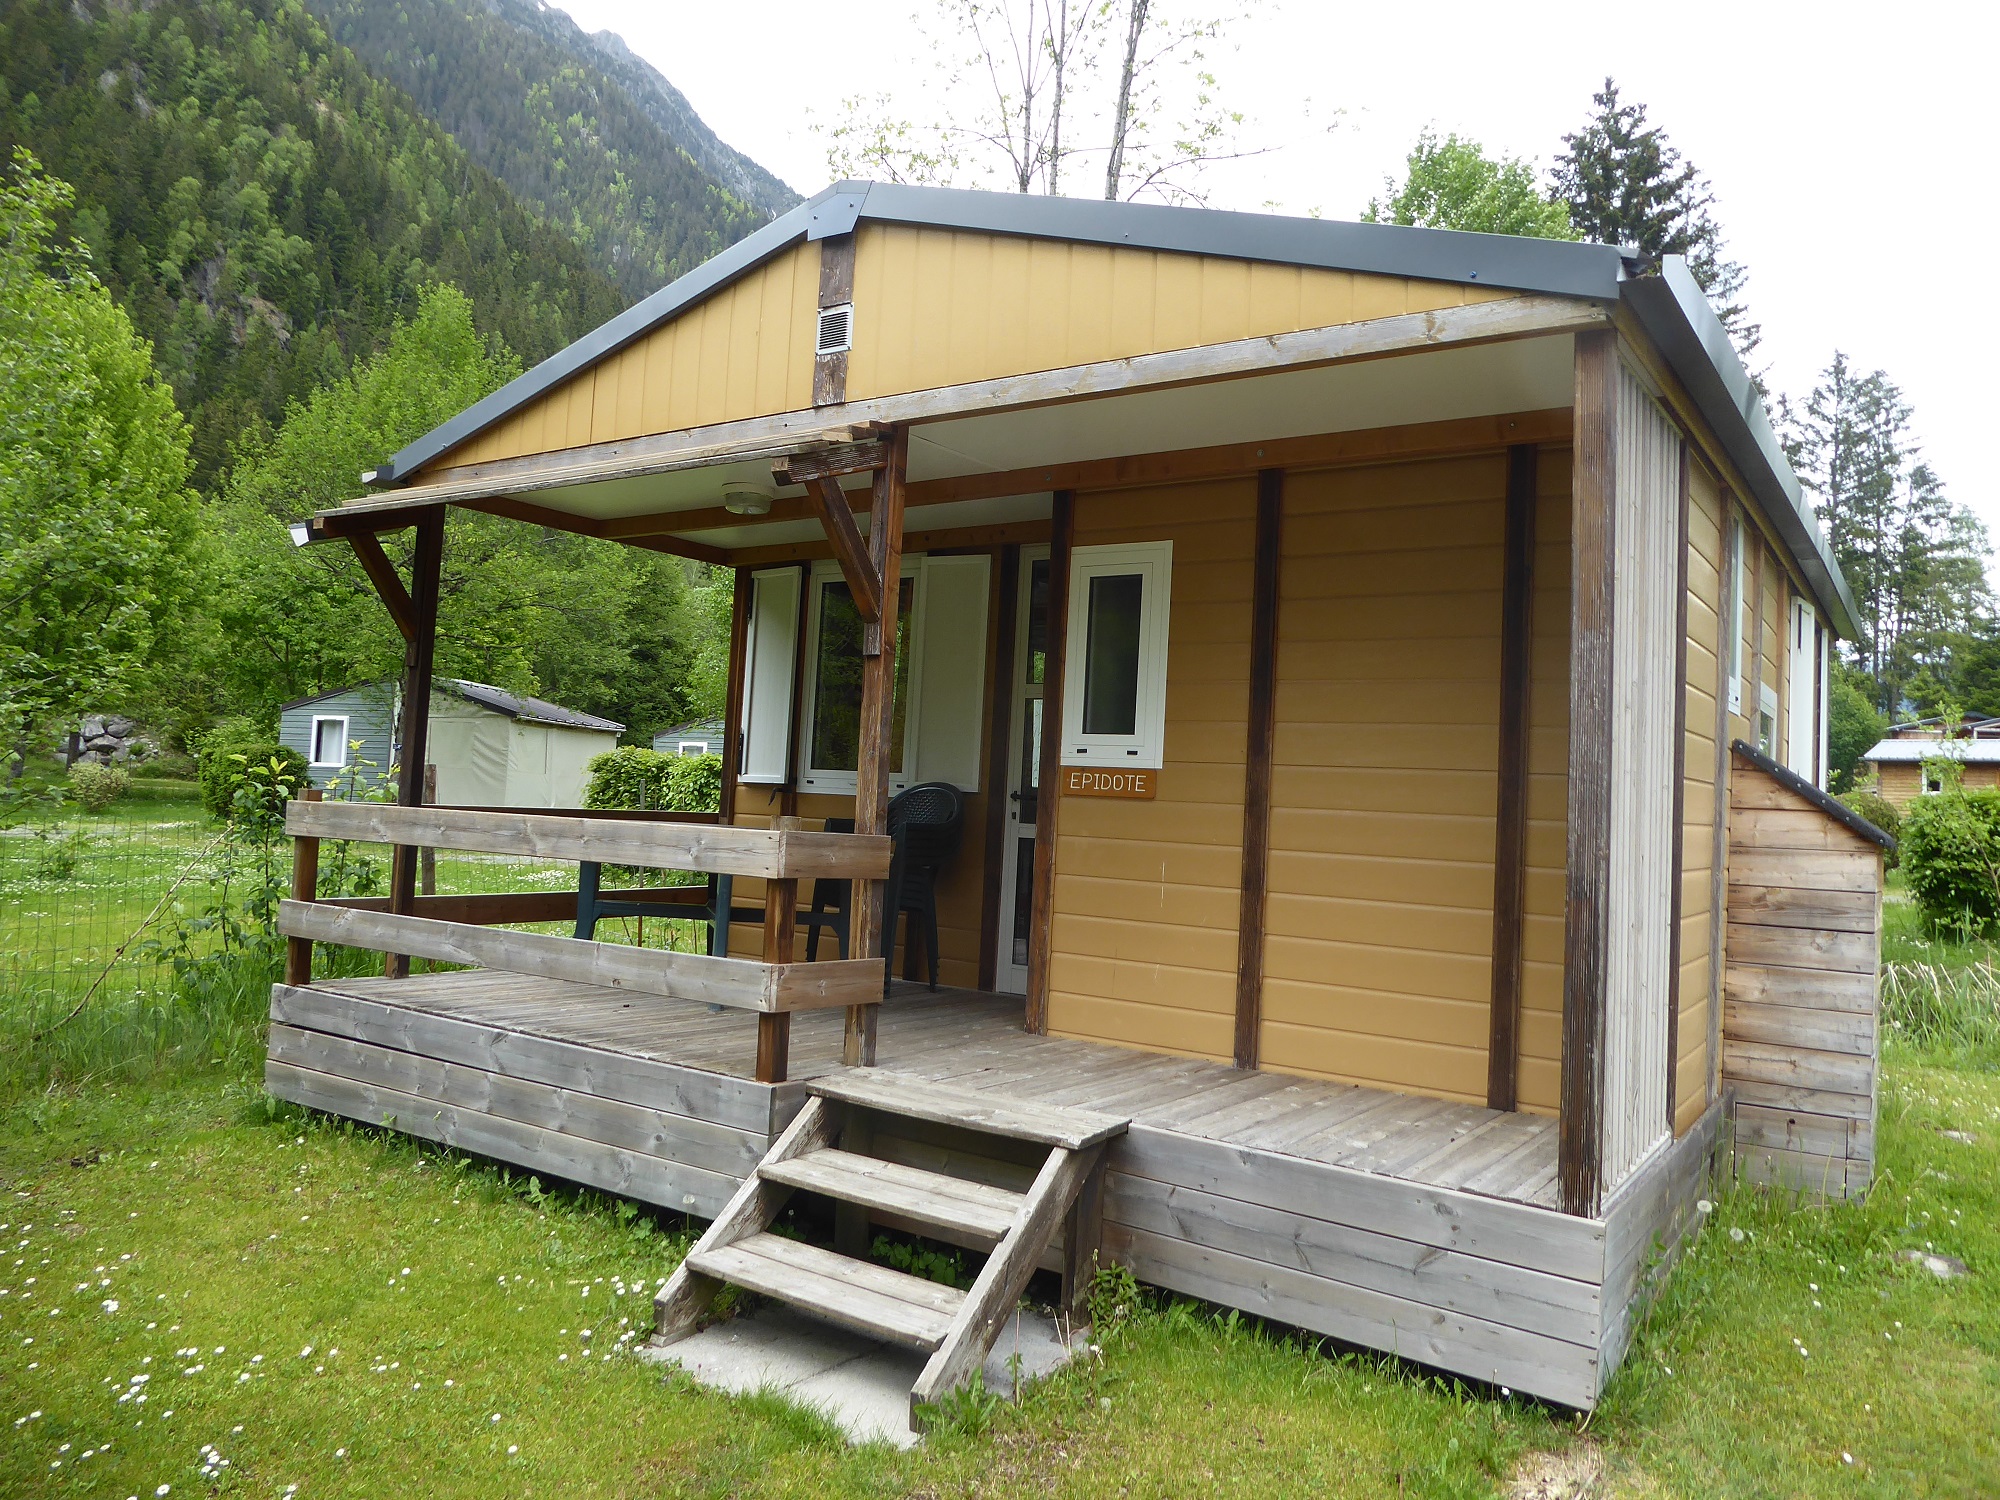 Accommodation - Chalet Club Epidote 2 Bedrooms / Arrival And Departure On Saturday In July And August - Camping Les Marmottes